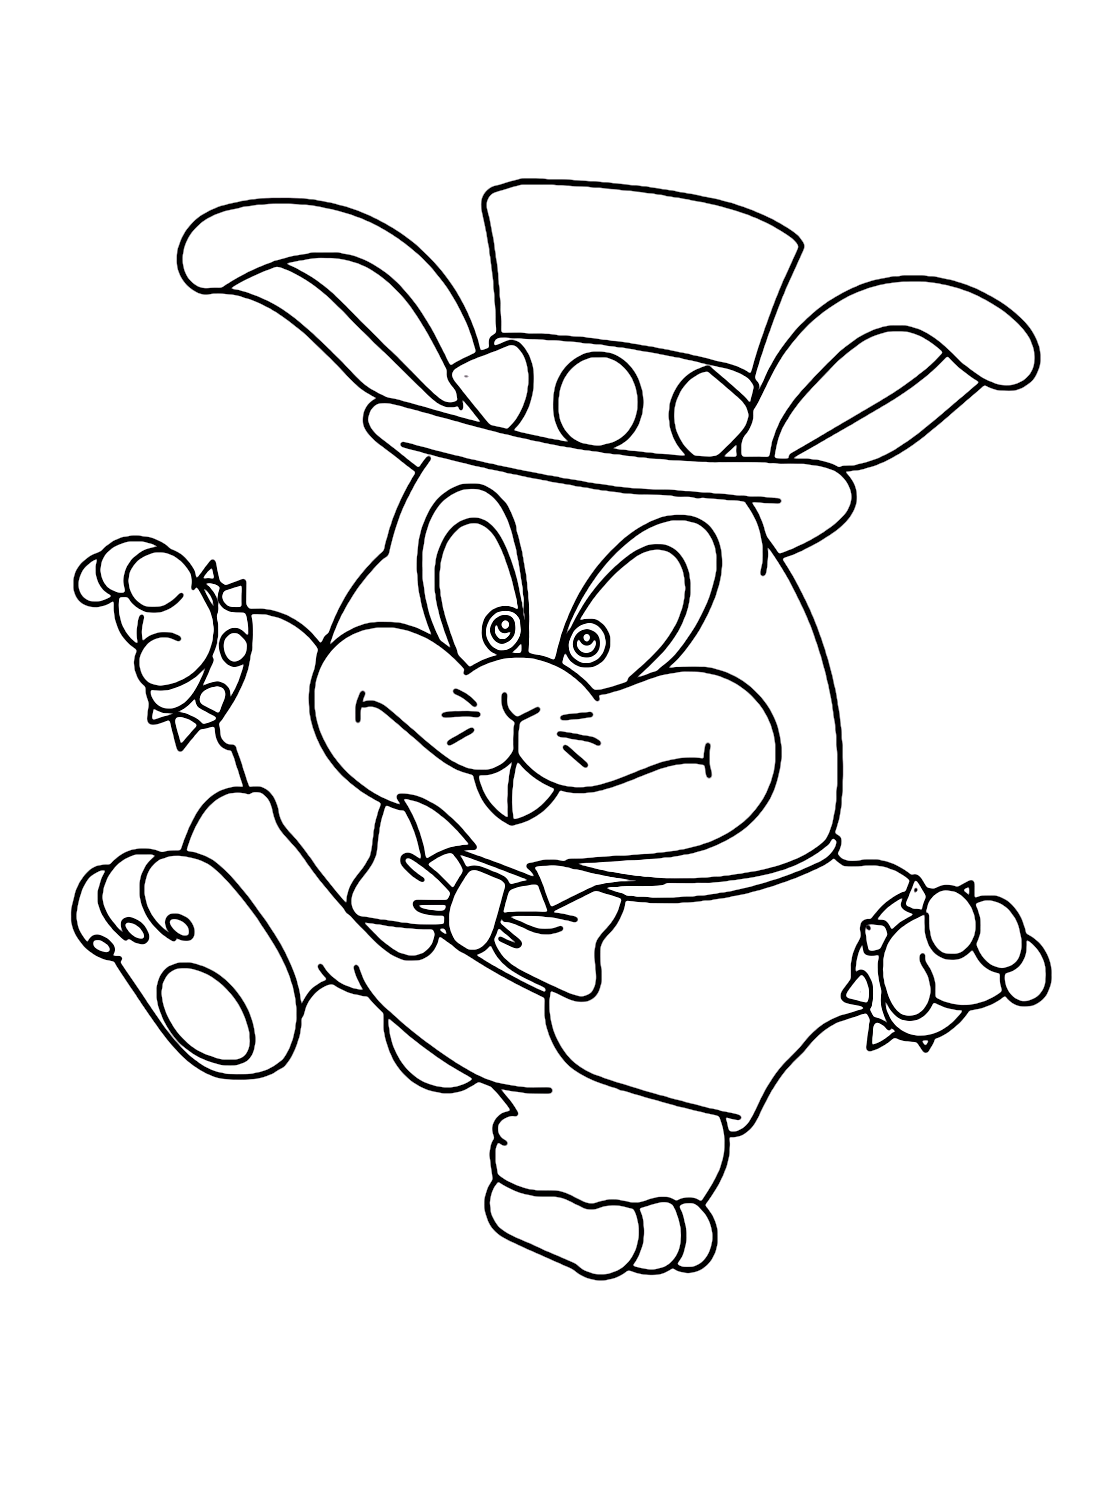 Topper from Super Mario Odyssey Coloring Page